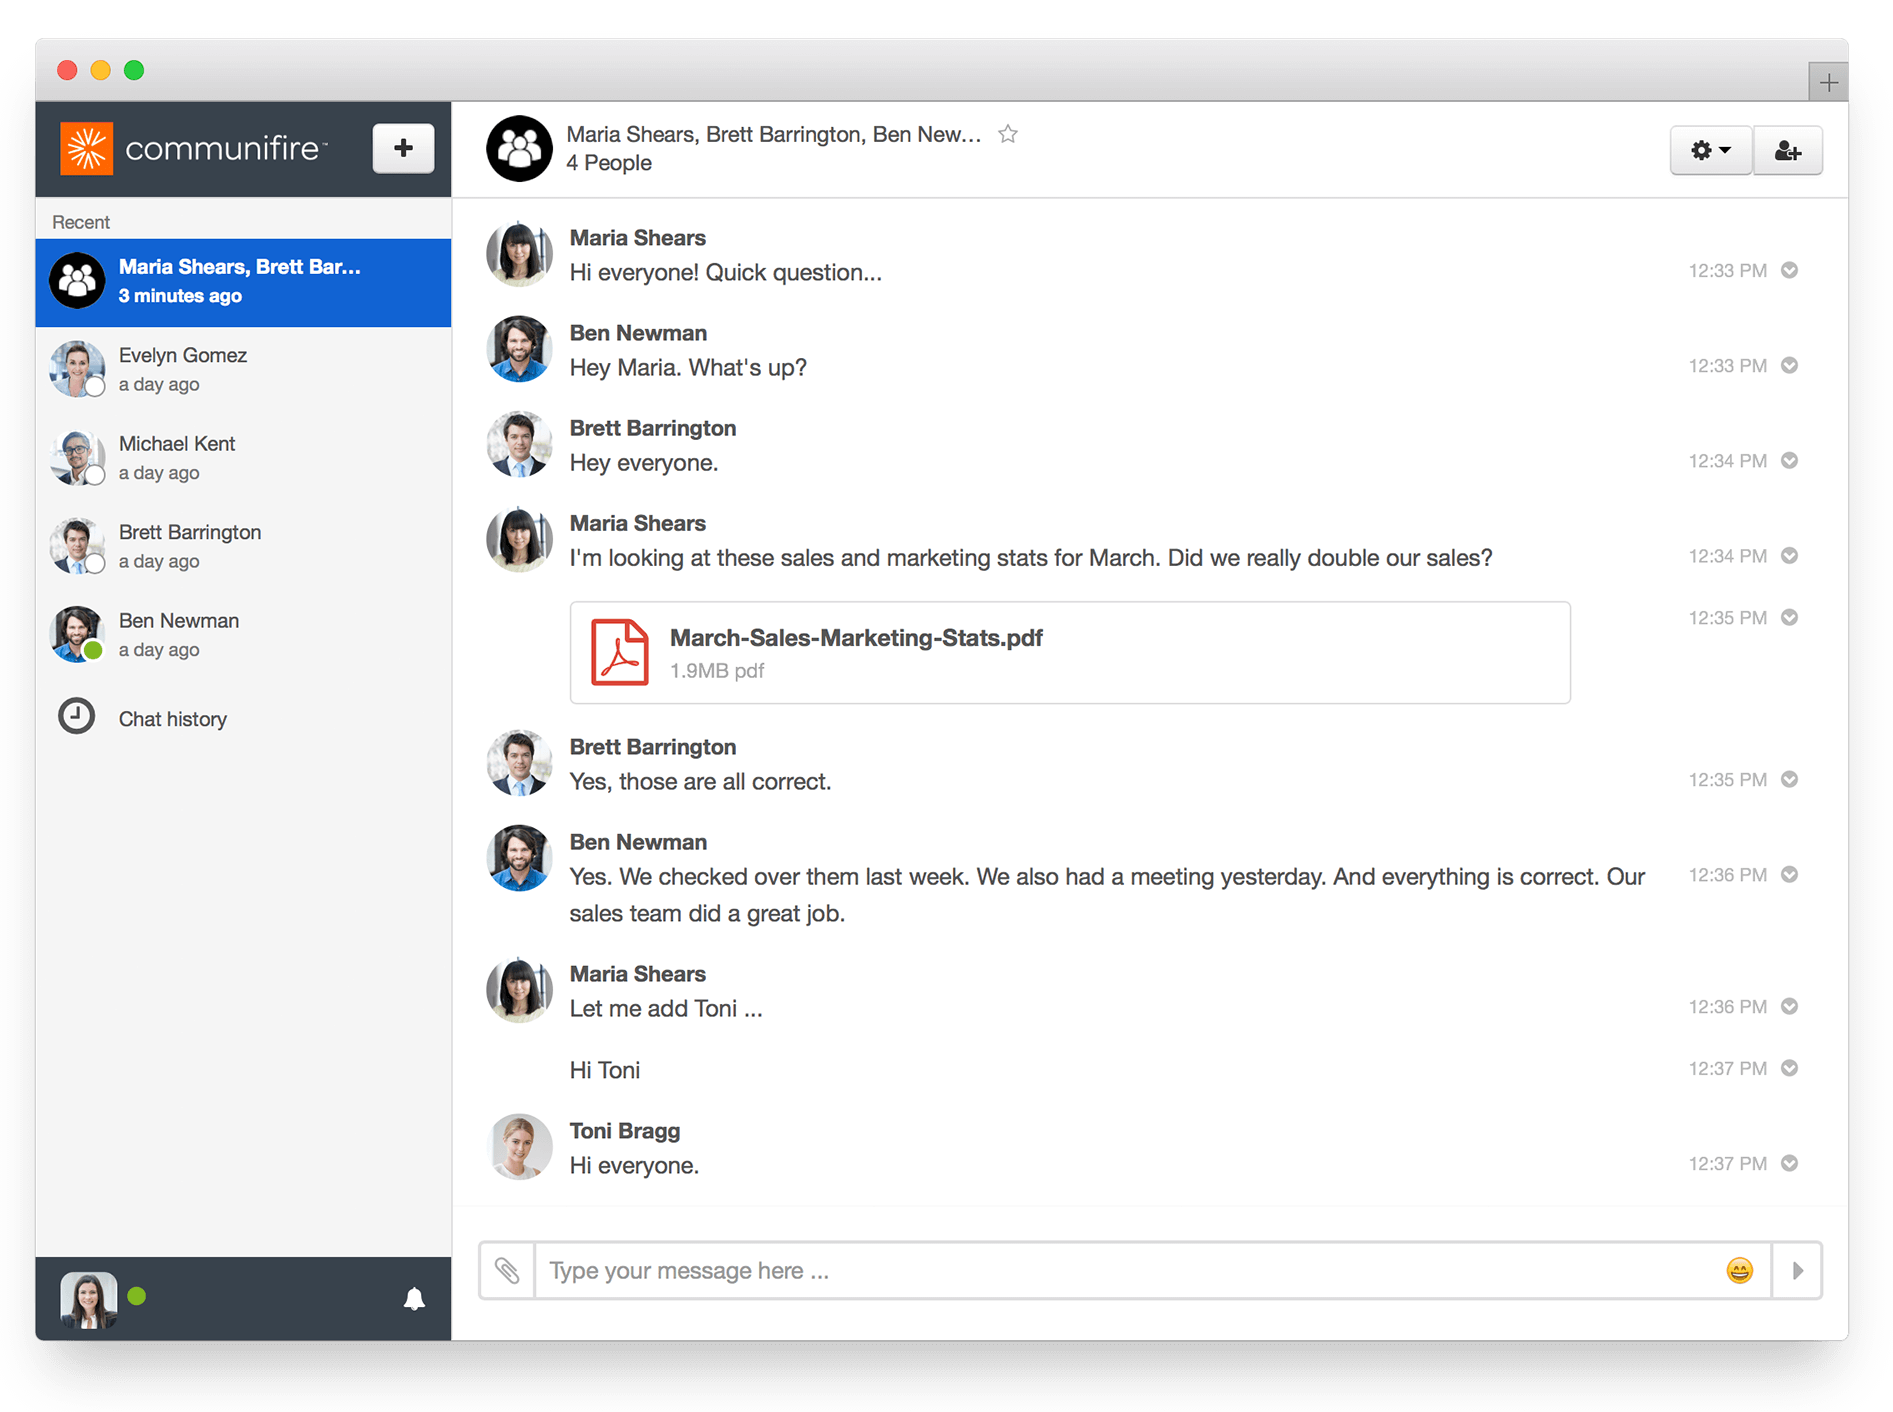 online collaboration tools for business - Communifire chat app